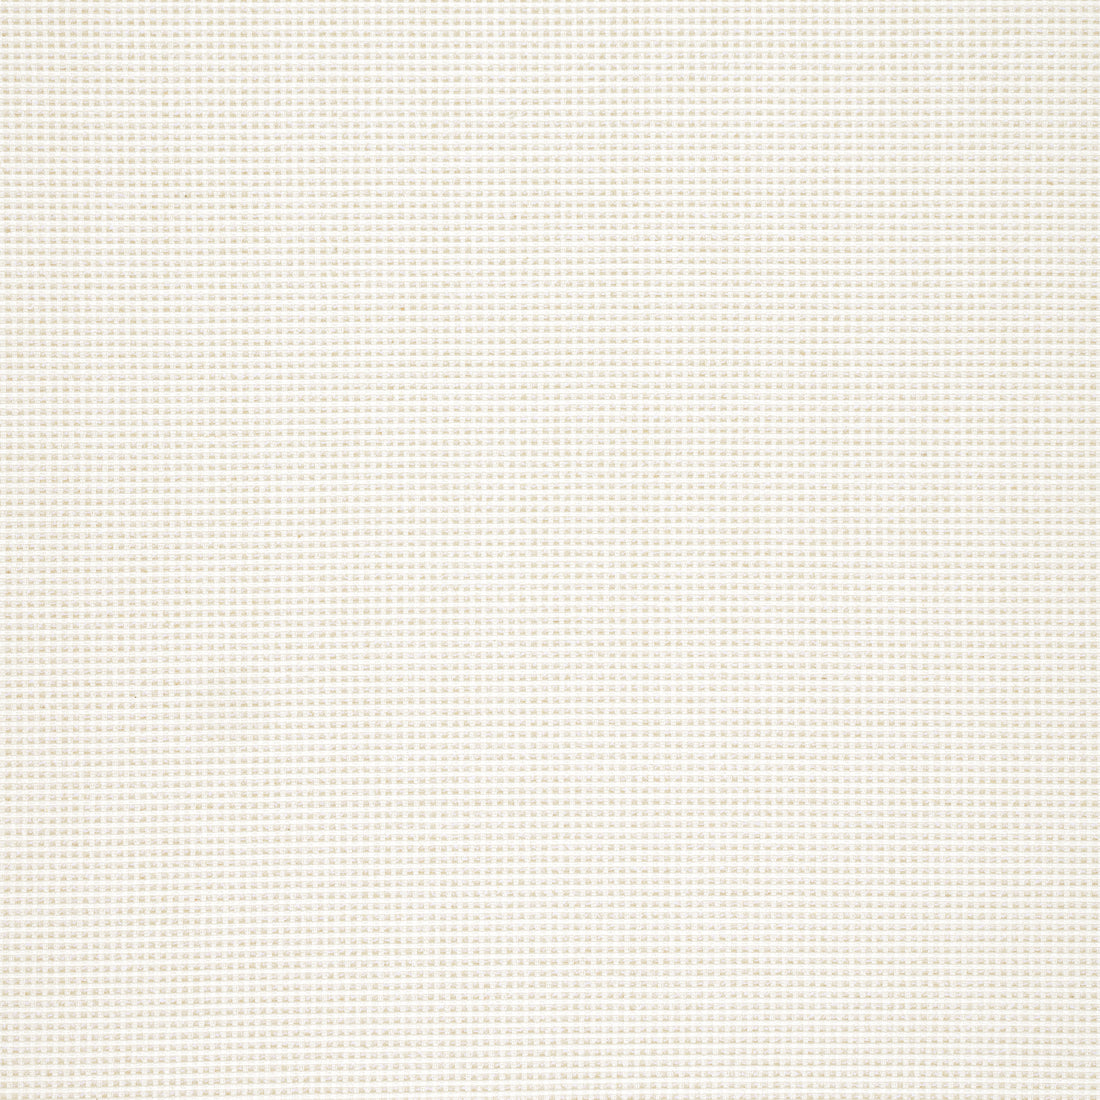 Stella fabric in parchment color - pattern number W77114 - by Thibaut in the Veneto collection